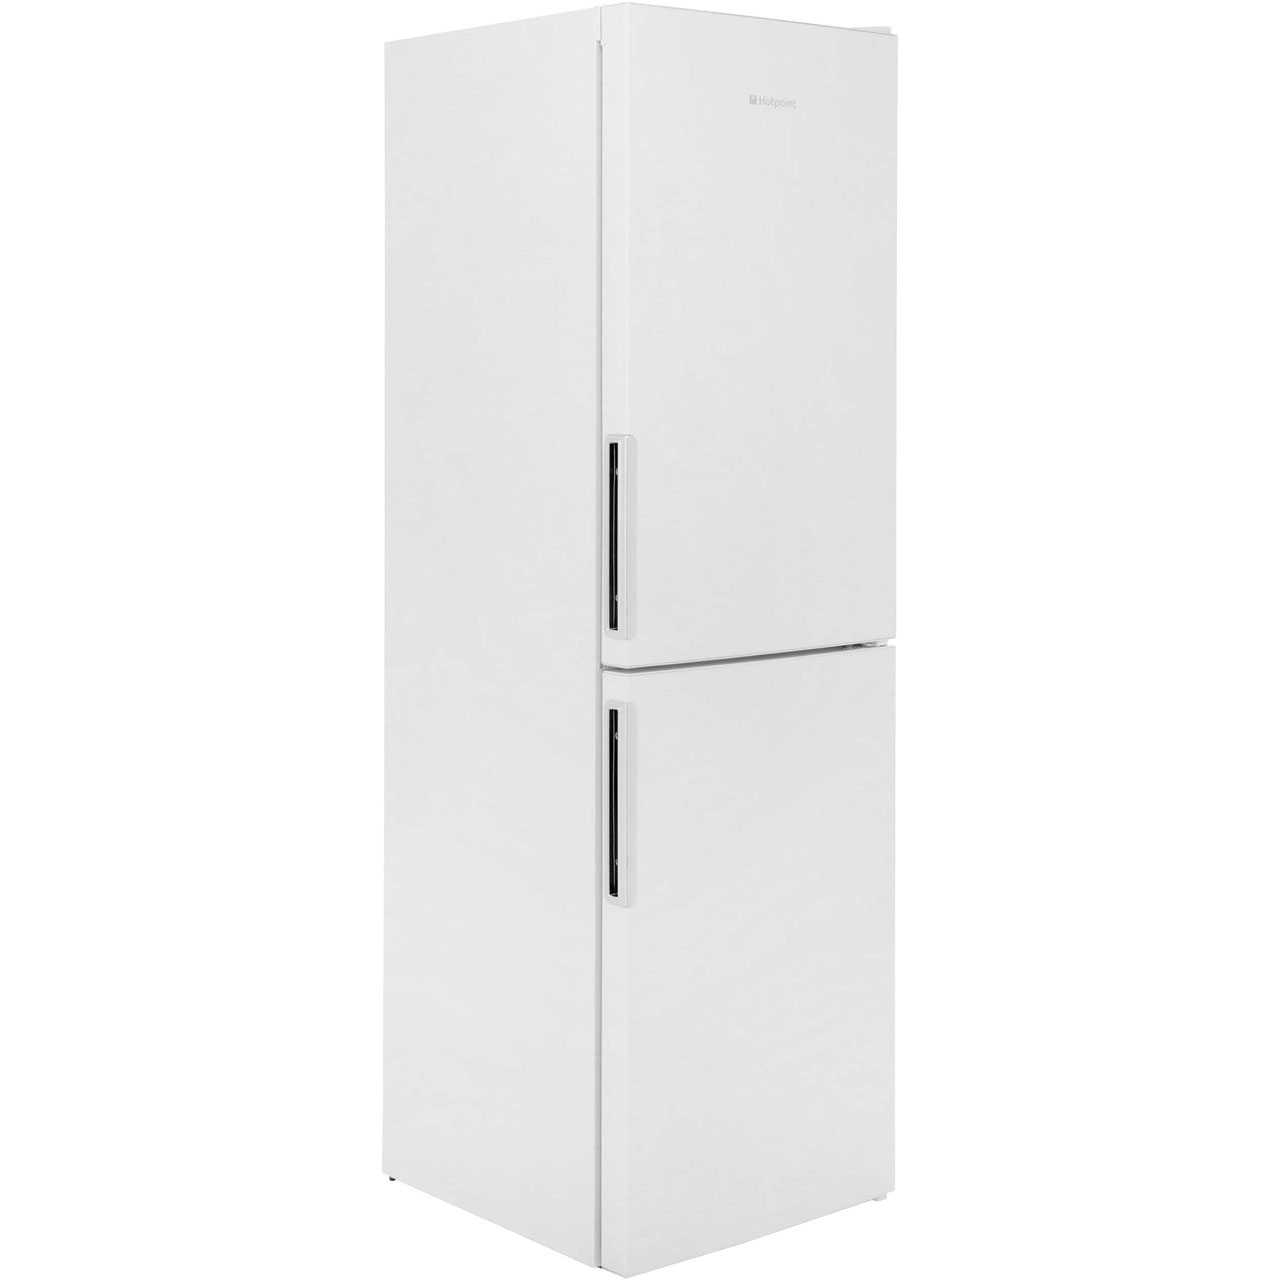 Hotpoint XAO95T1IW Free Standing Fridge Freezer Frost Free in White